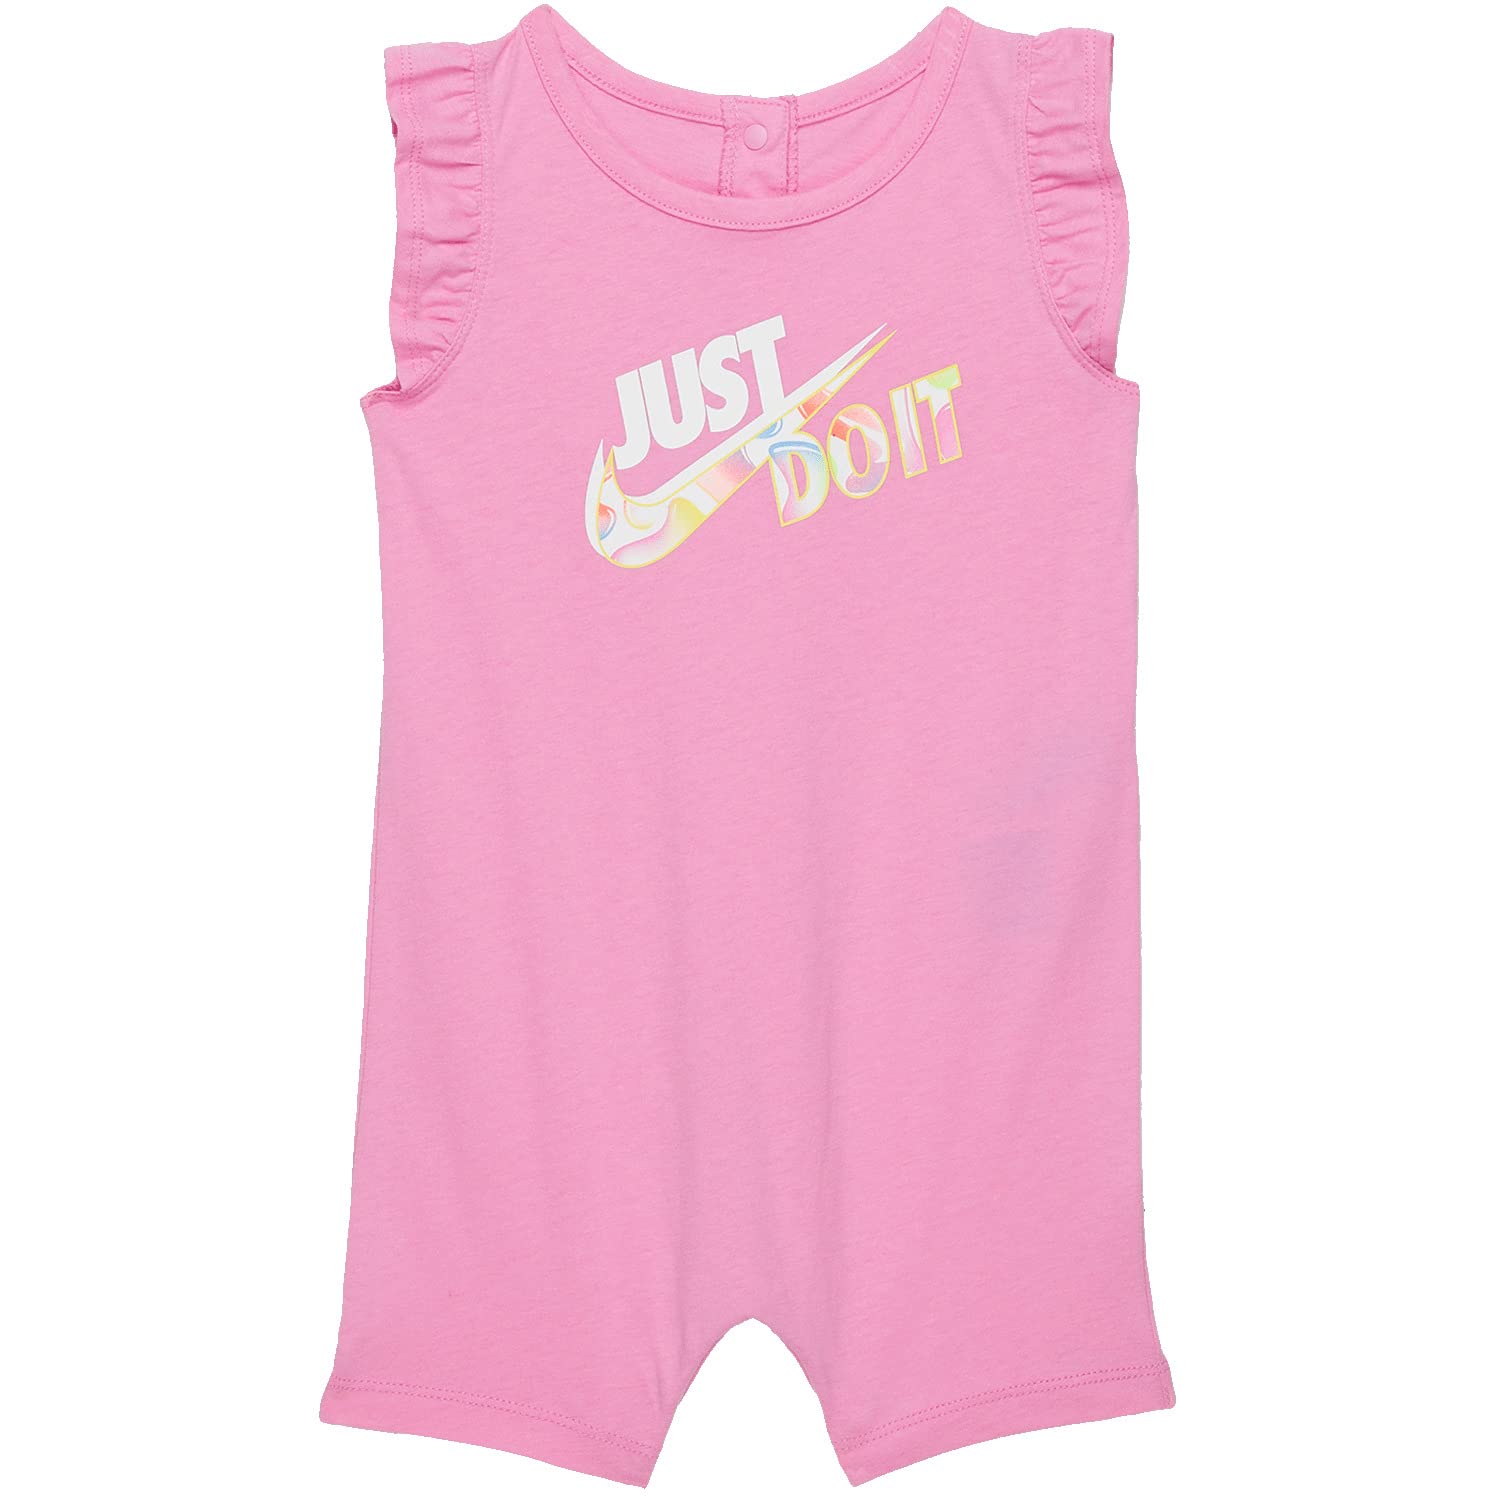 Image 1 of Graphic Romper (Infant)